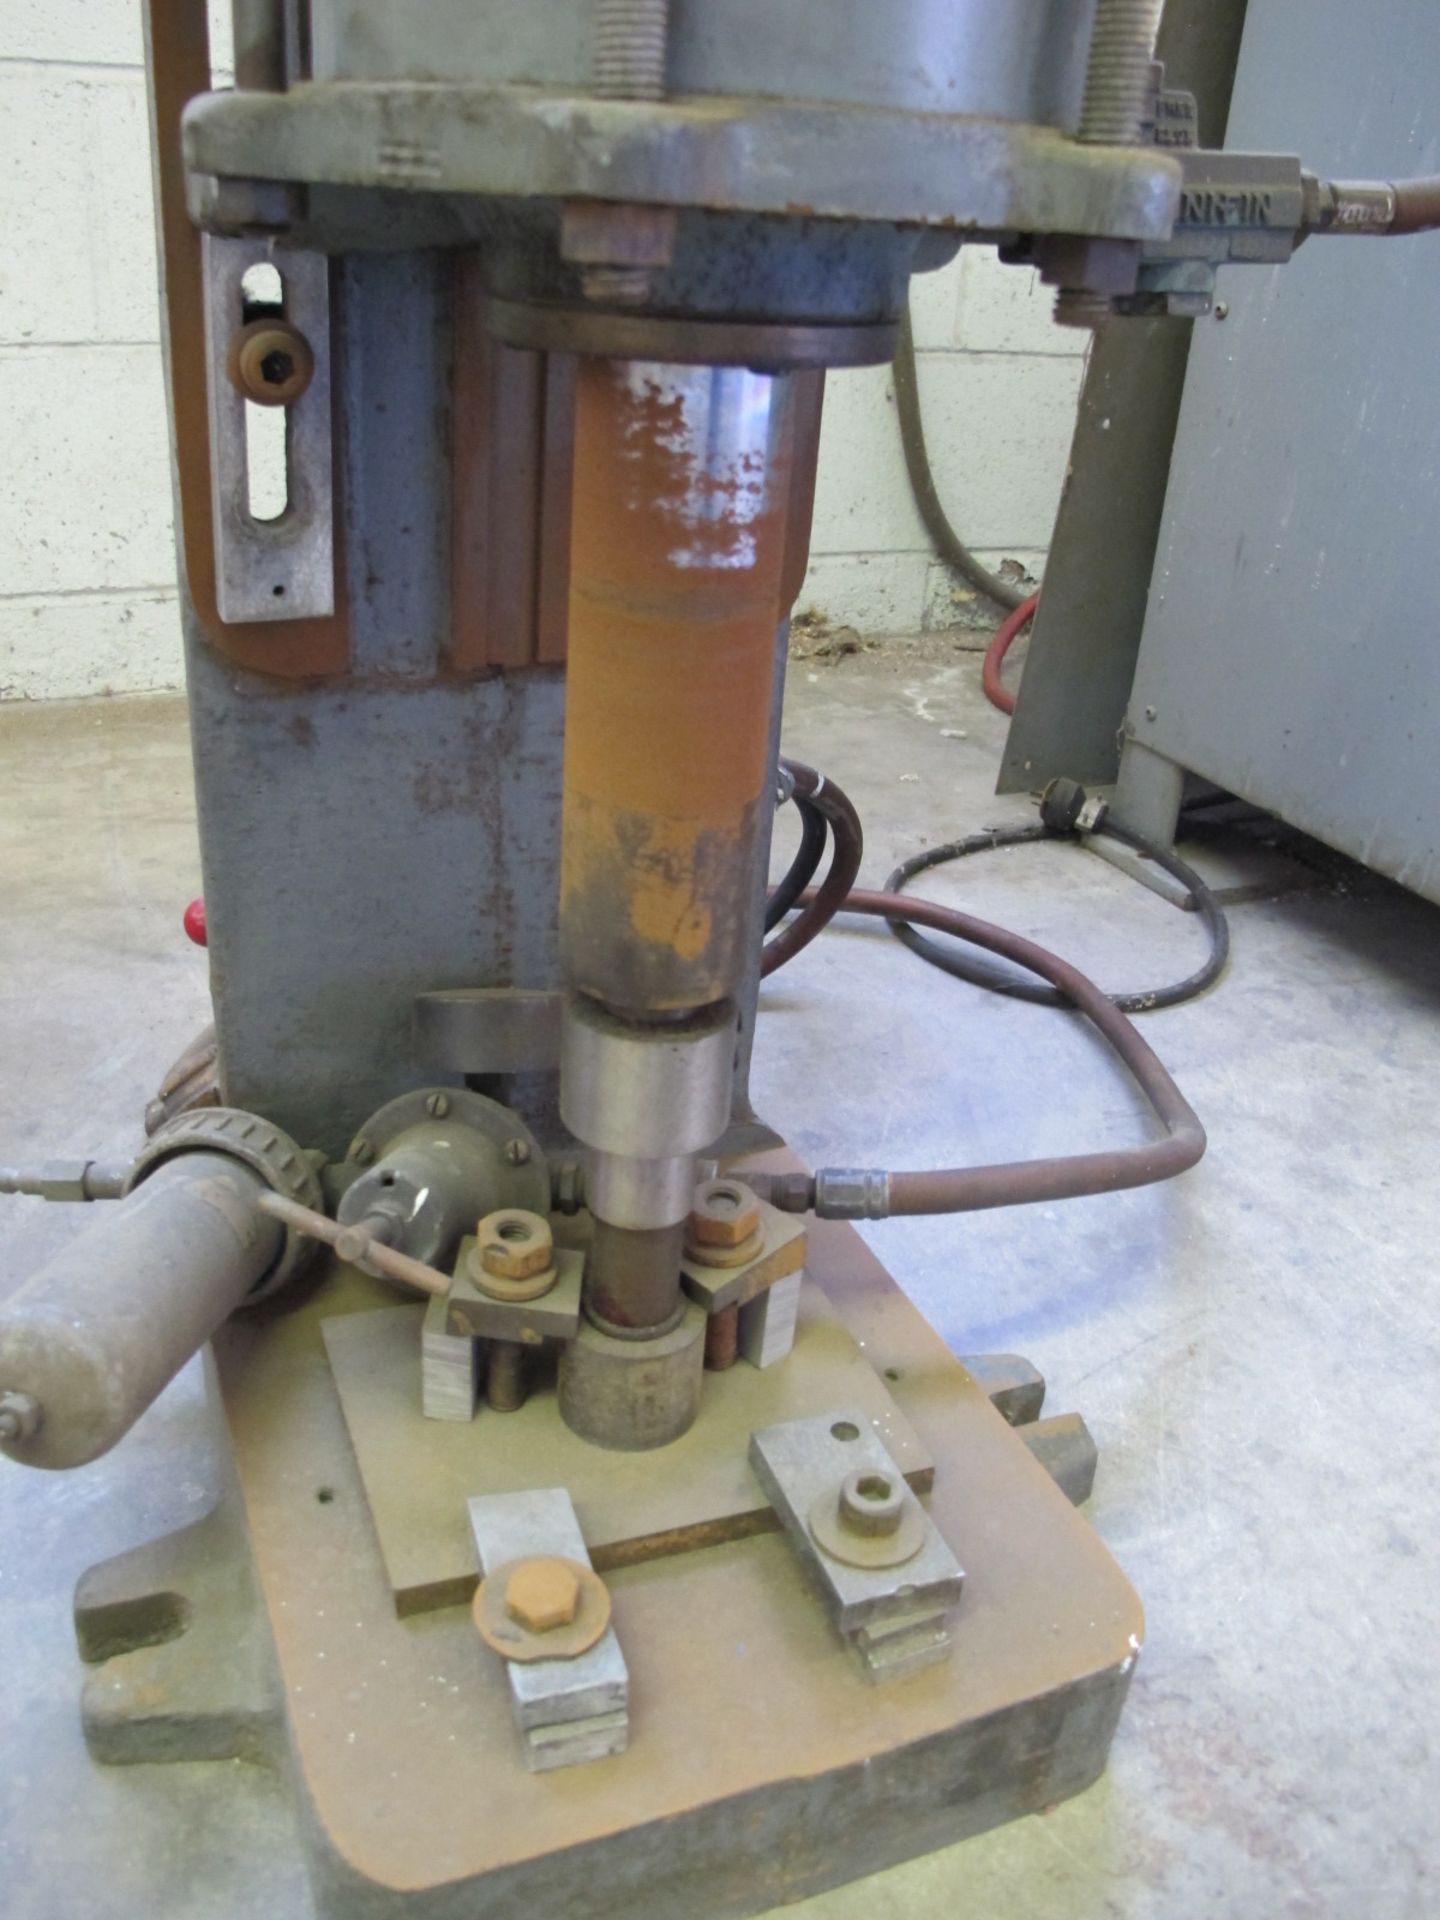 Hannifin Pneumatic Press Mdl A01 2650lb - Image 3 of 3